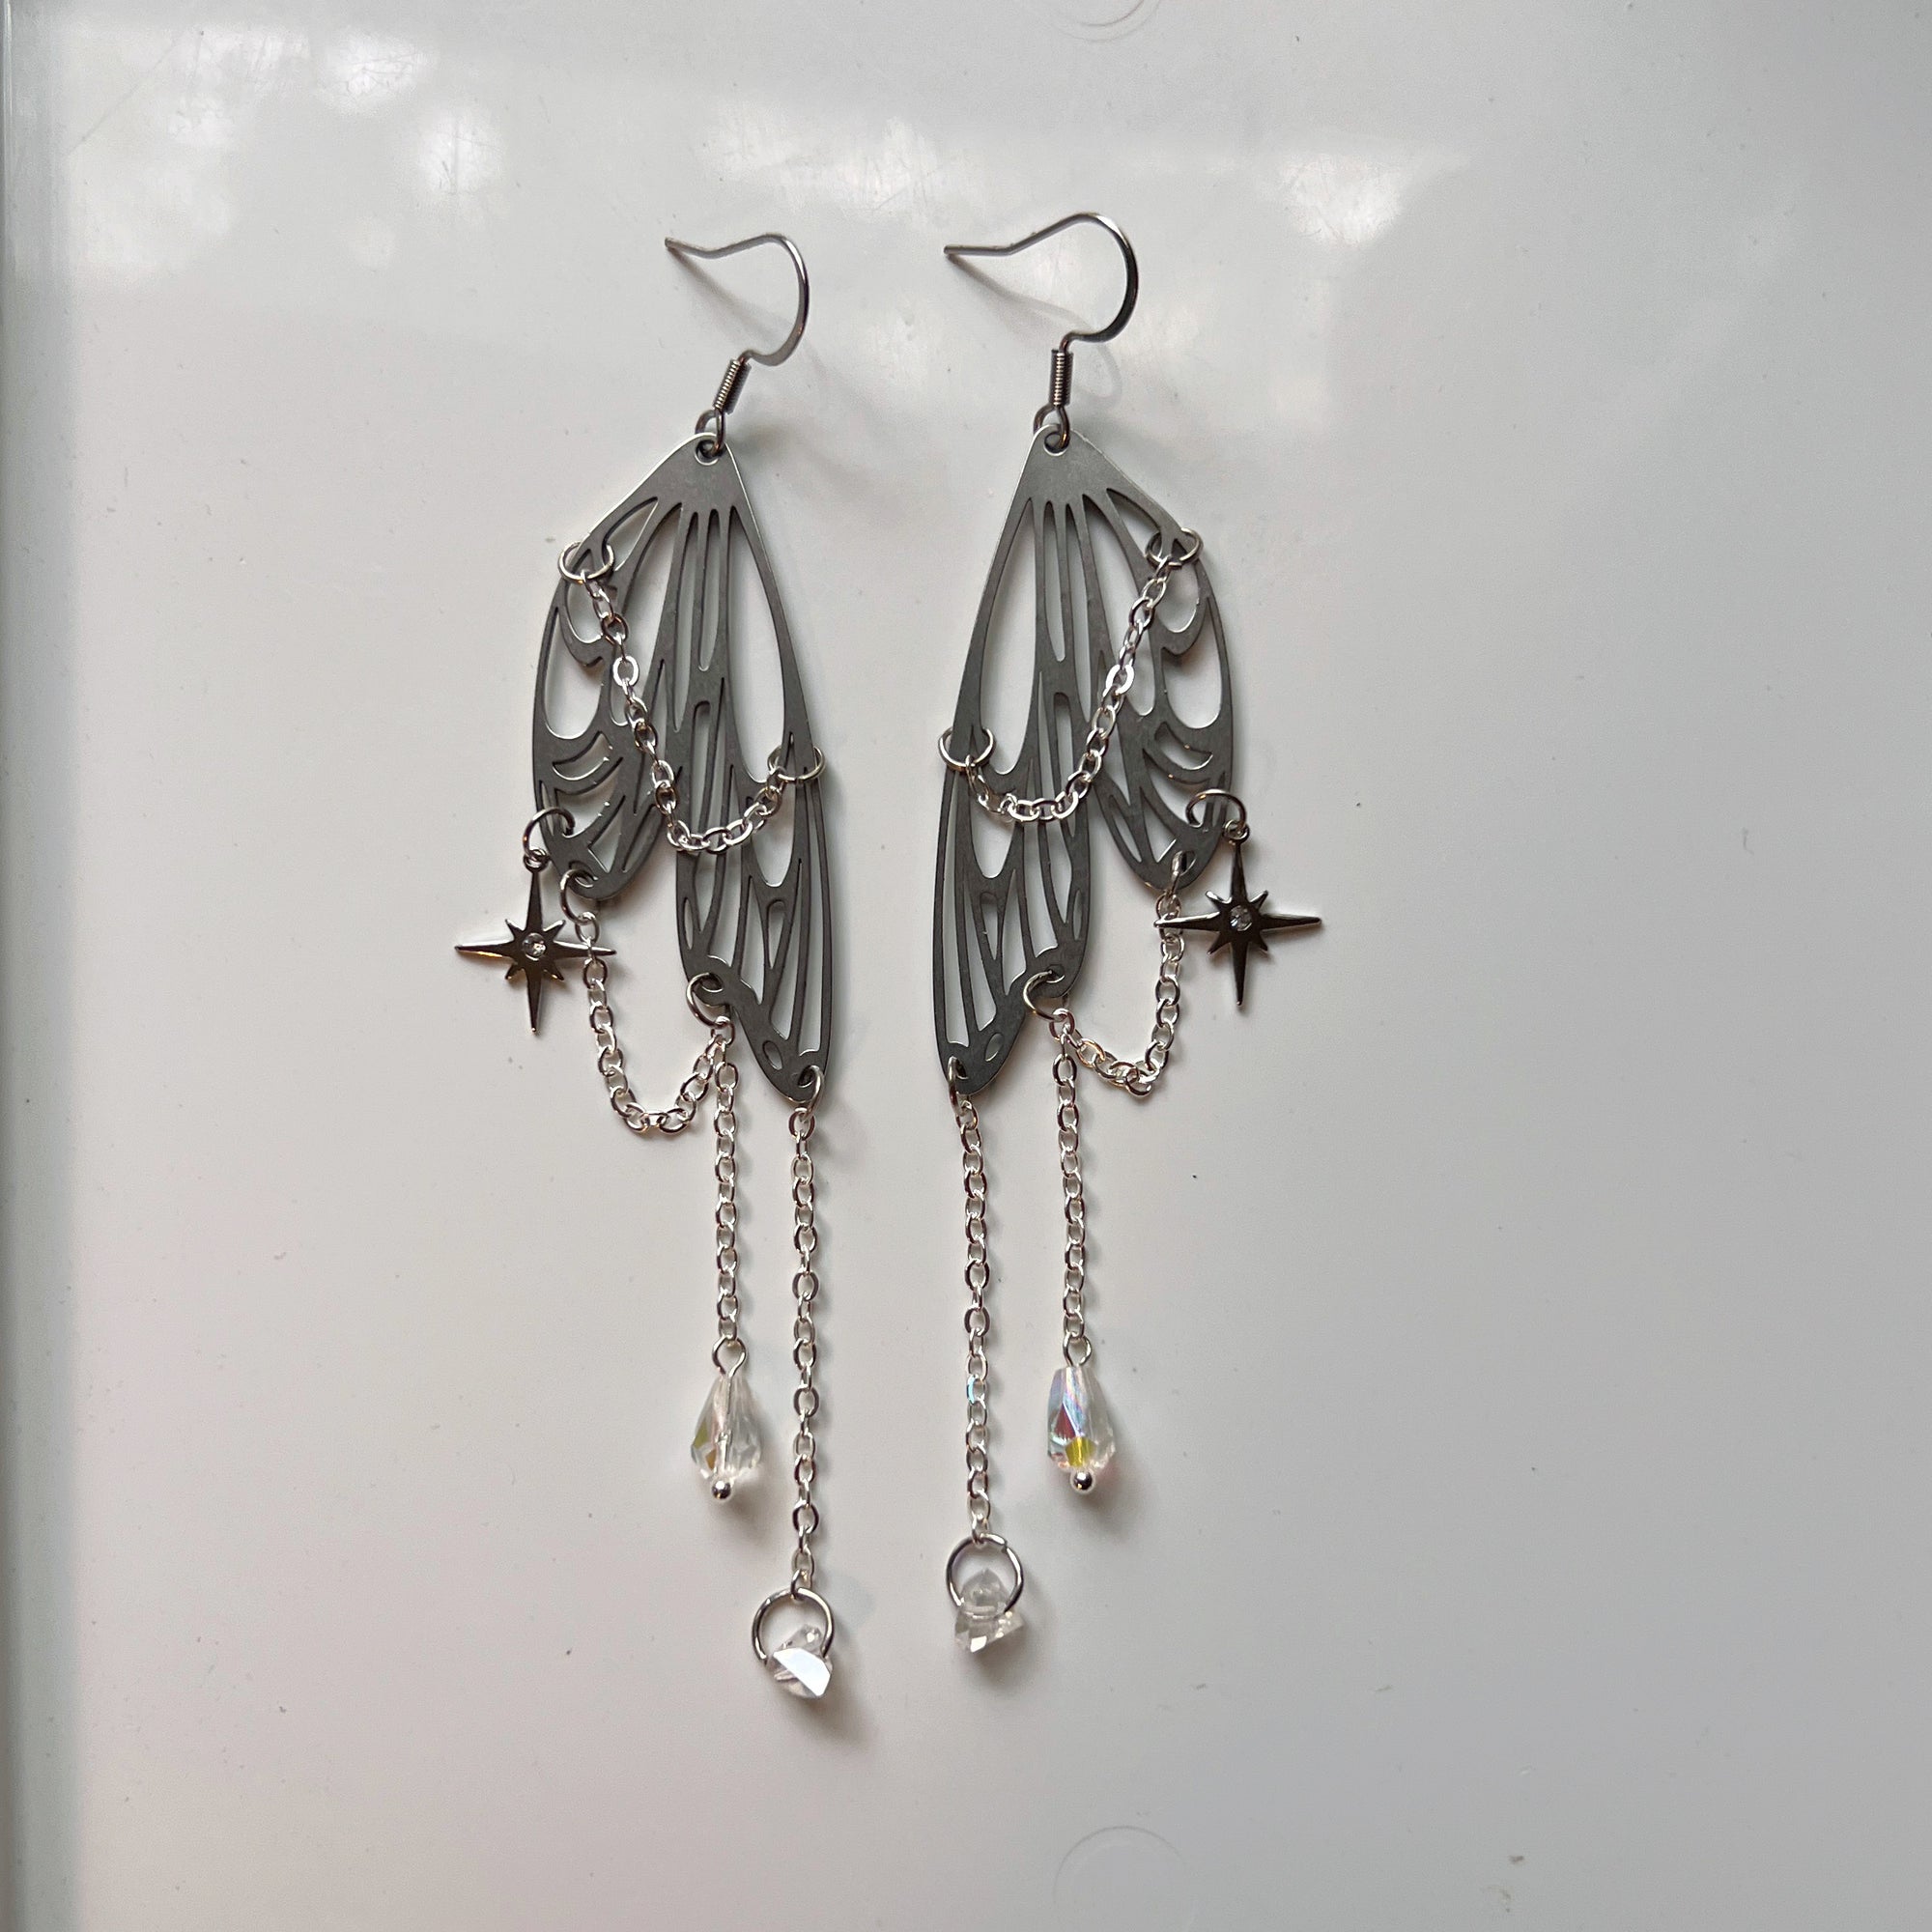 Moonlight Earrings || Corpse Bride Collection